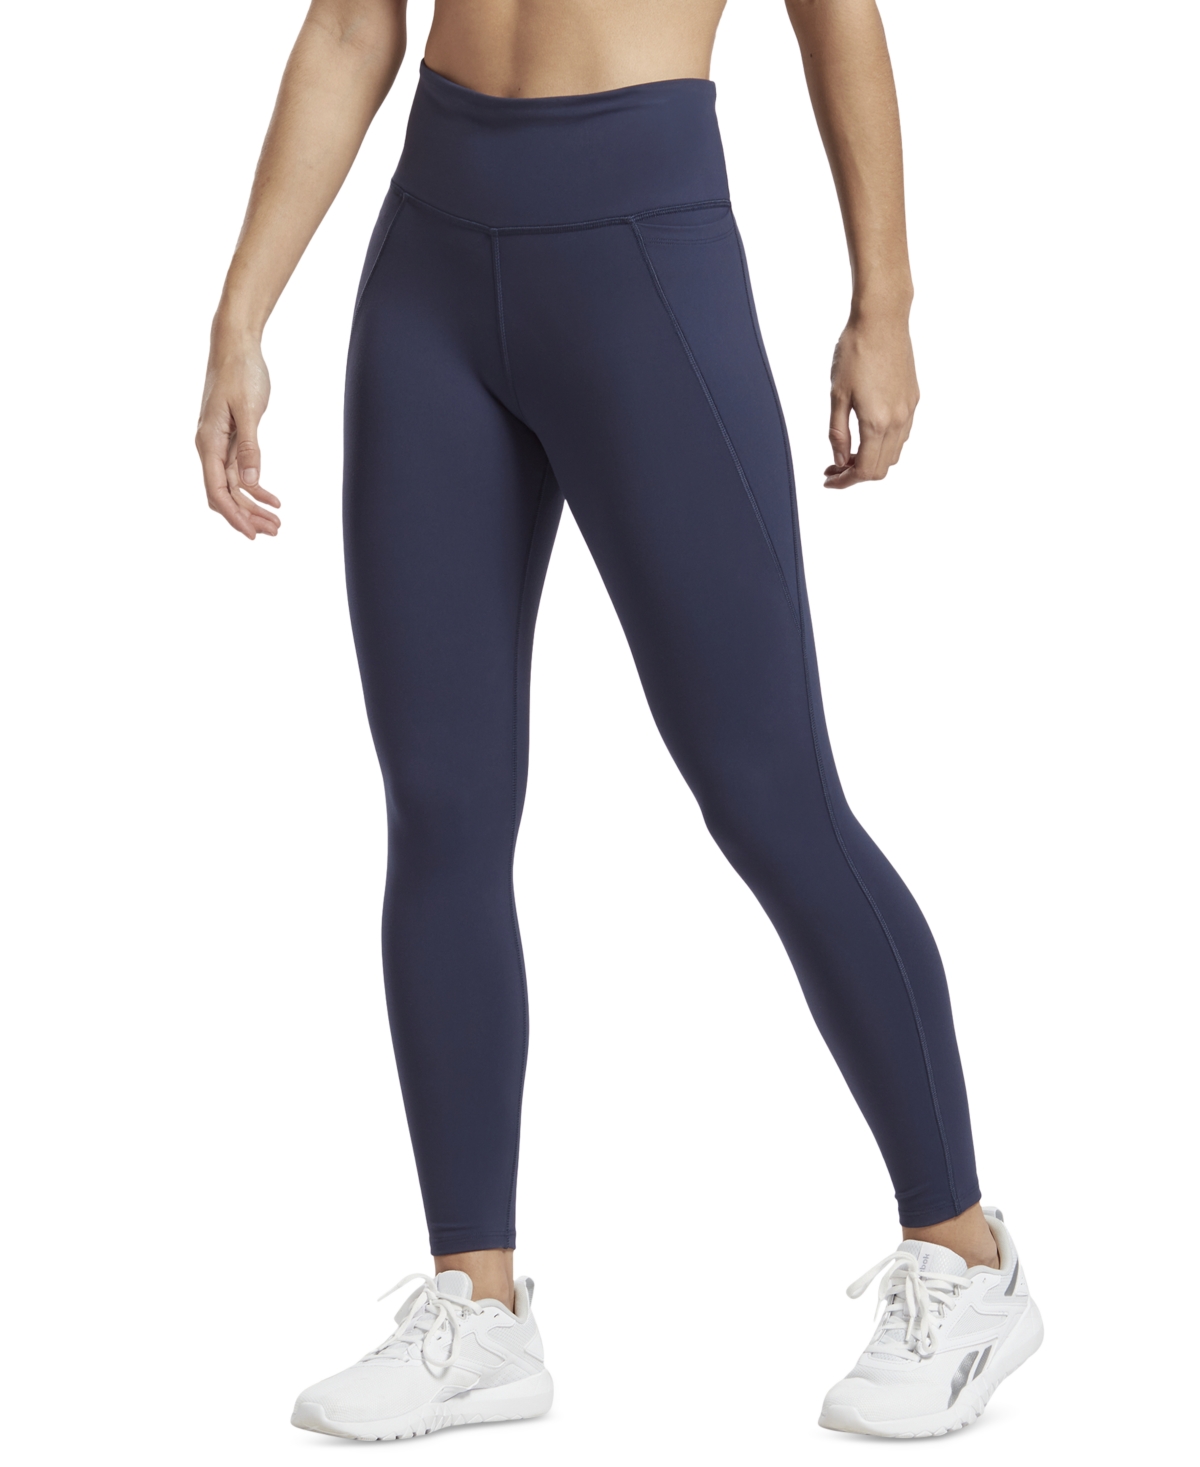 Women's Lux High-Waisted Pull-On Leggings, A Macy's Exclusive - Vector Navy